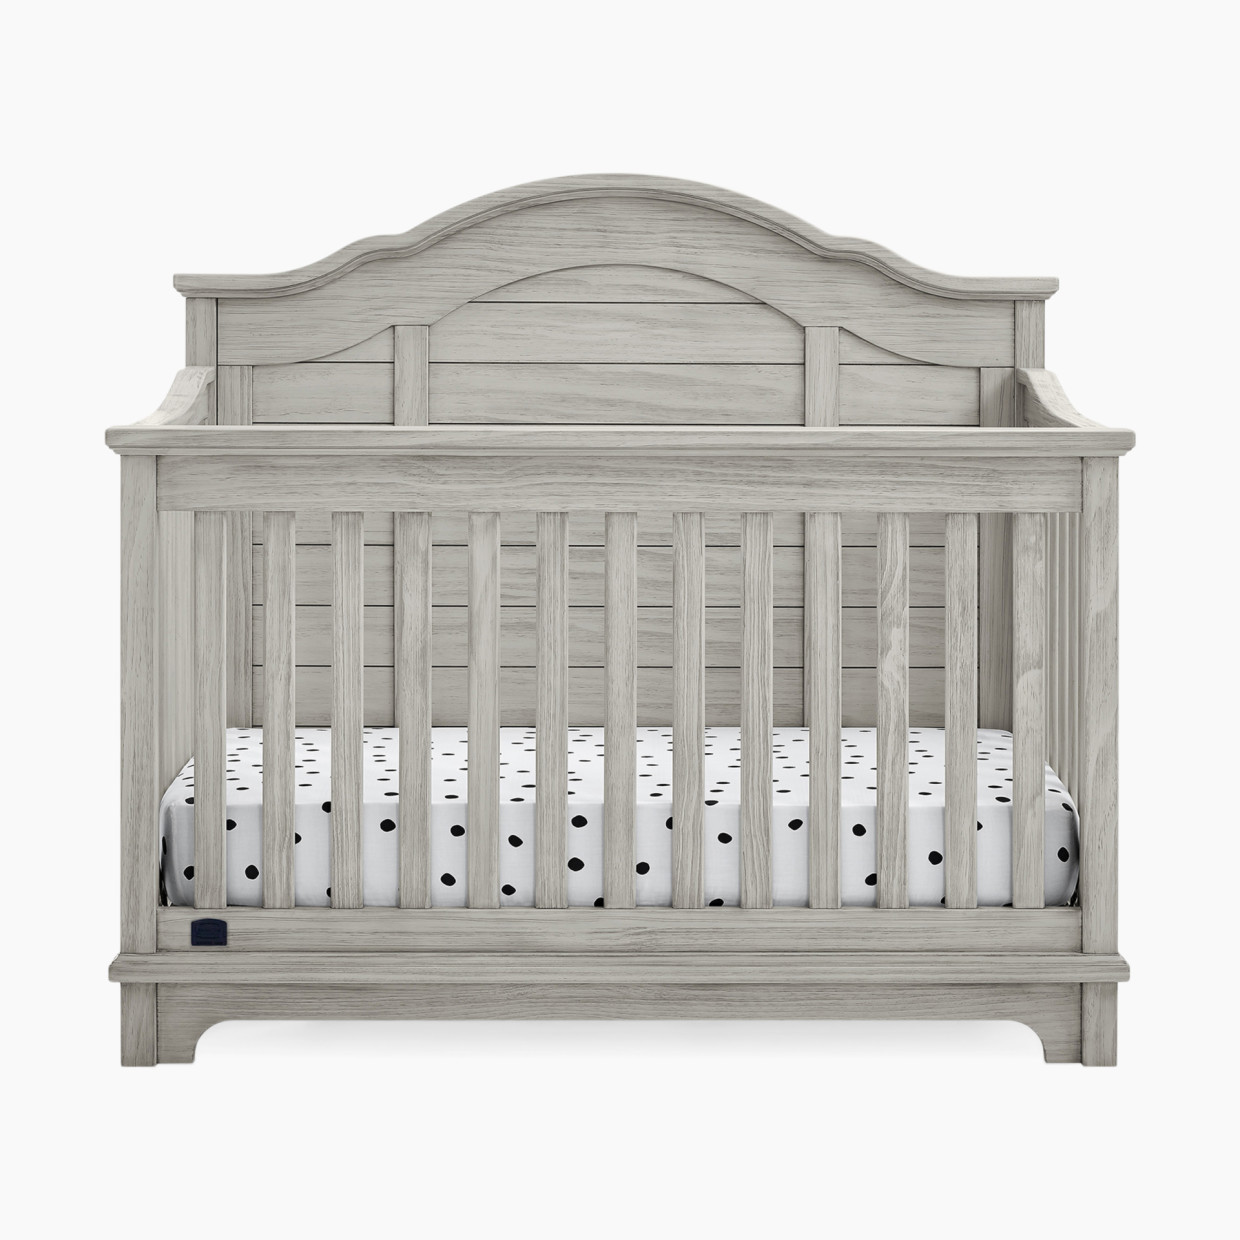 Simmons Kids Asher 6-in-1 Convertible Crib with Toddler Rail.